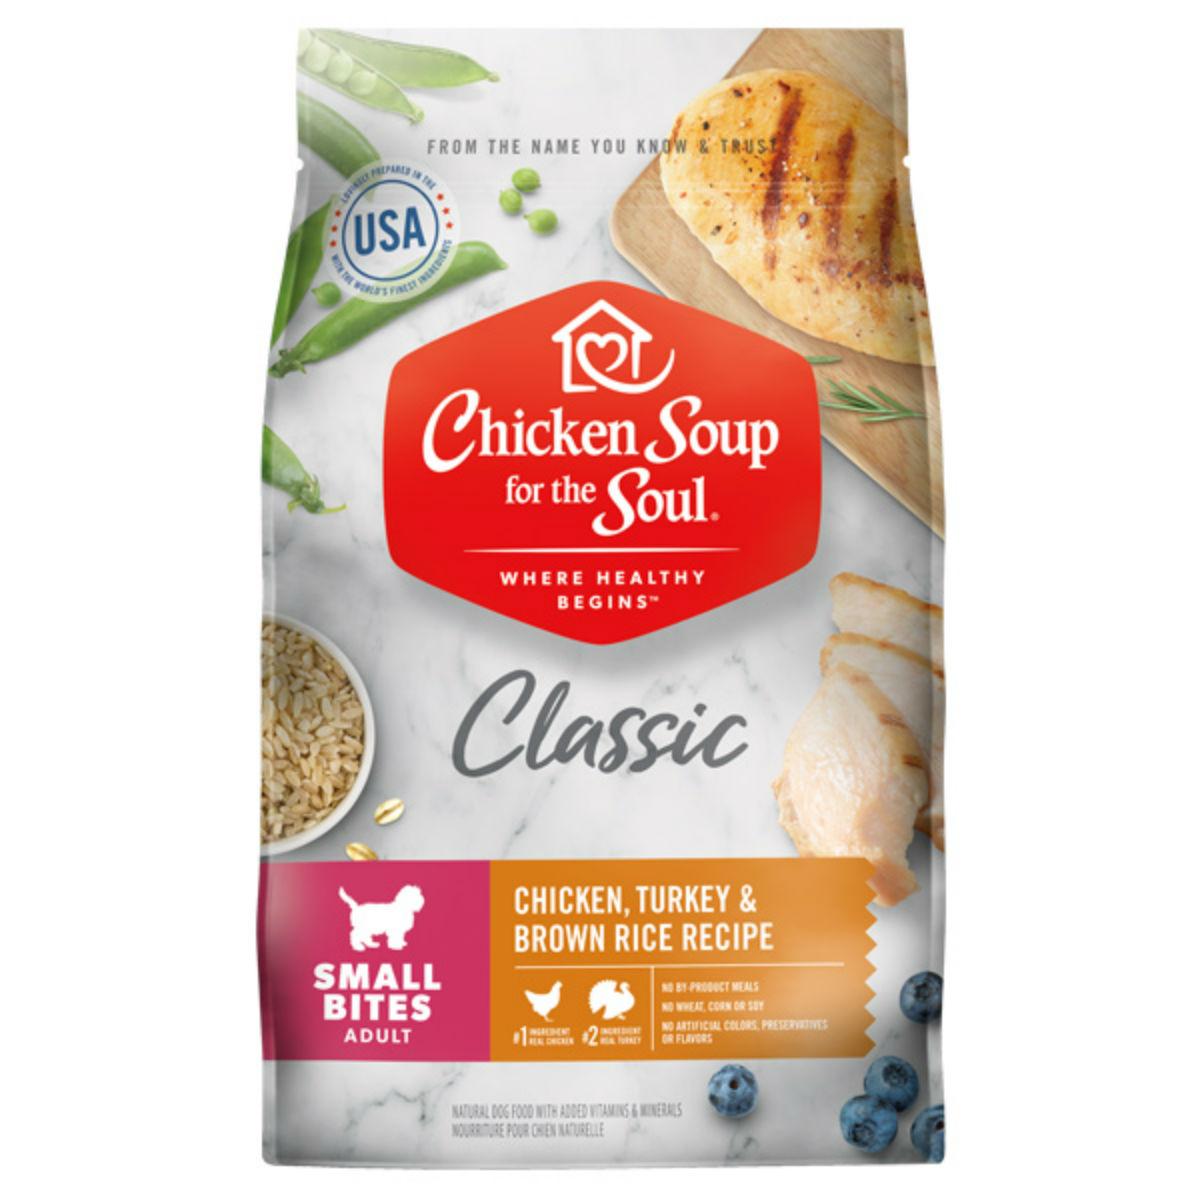 Chicken Soup for the Soul Classic Adult Small Bites Dry Dog Food - Chicken, Turkey & Brown Rice